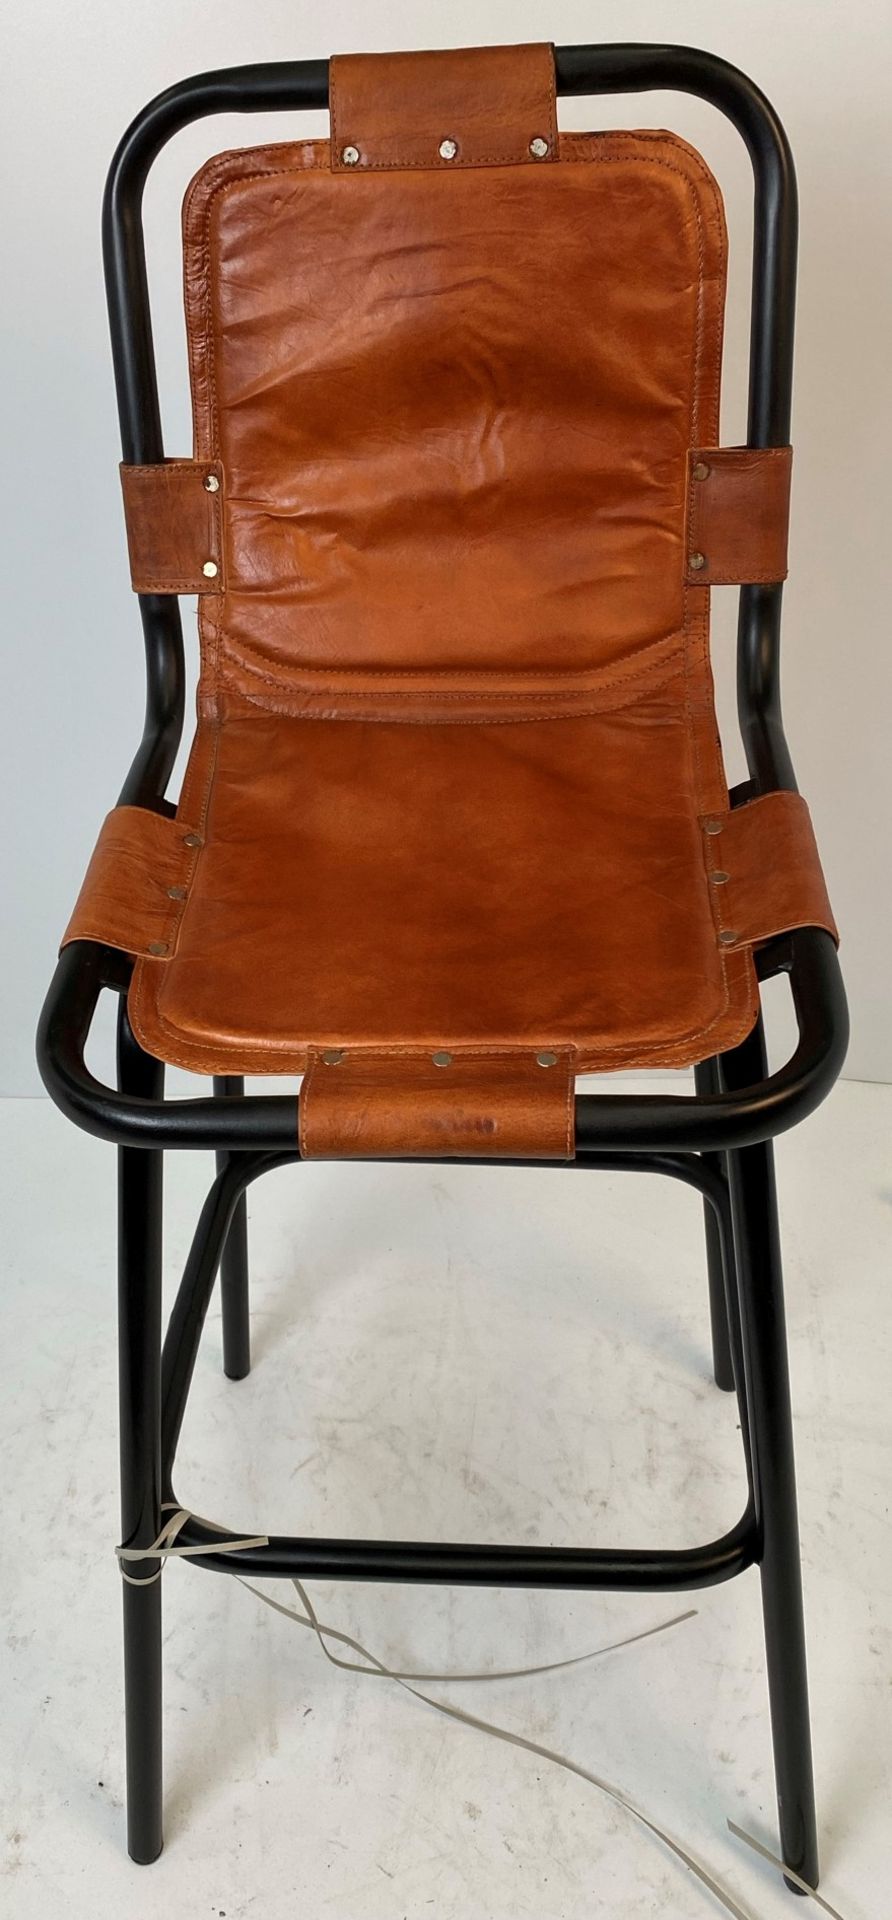 2 x Industrial Saddle chairs with black metal frame and brown leather effect seat